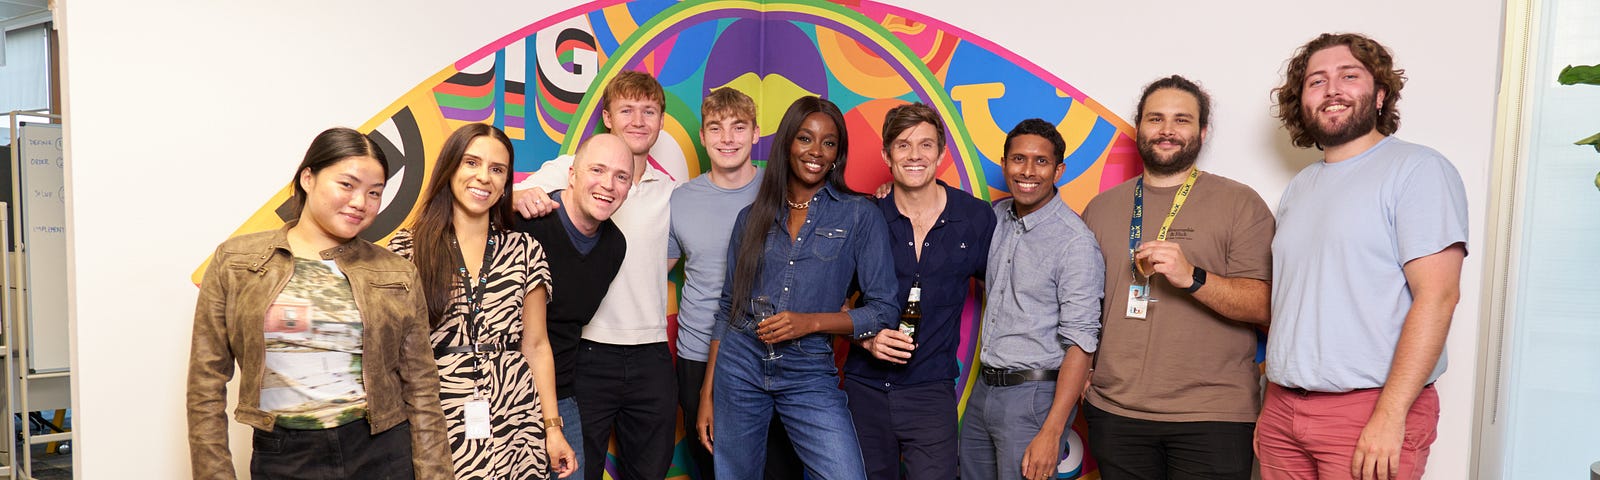 Some of our past and present Technology Graduates and the team with Big Brother Hosts, AJ and Will at one of our ITV Social events